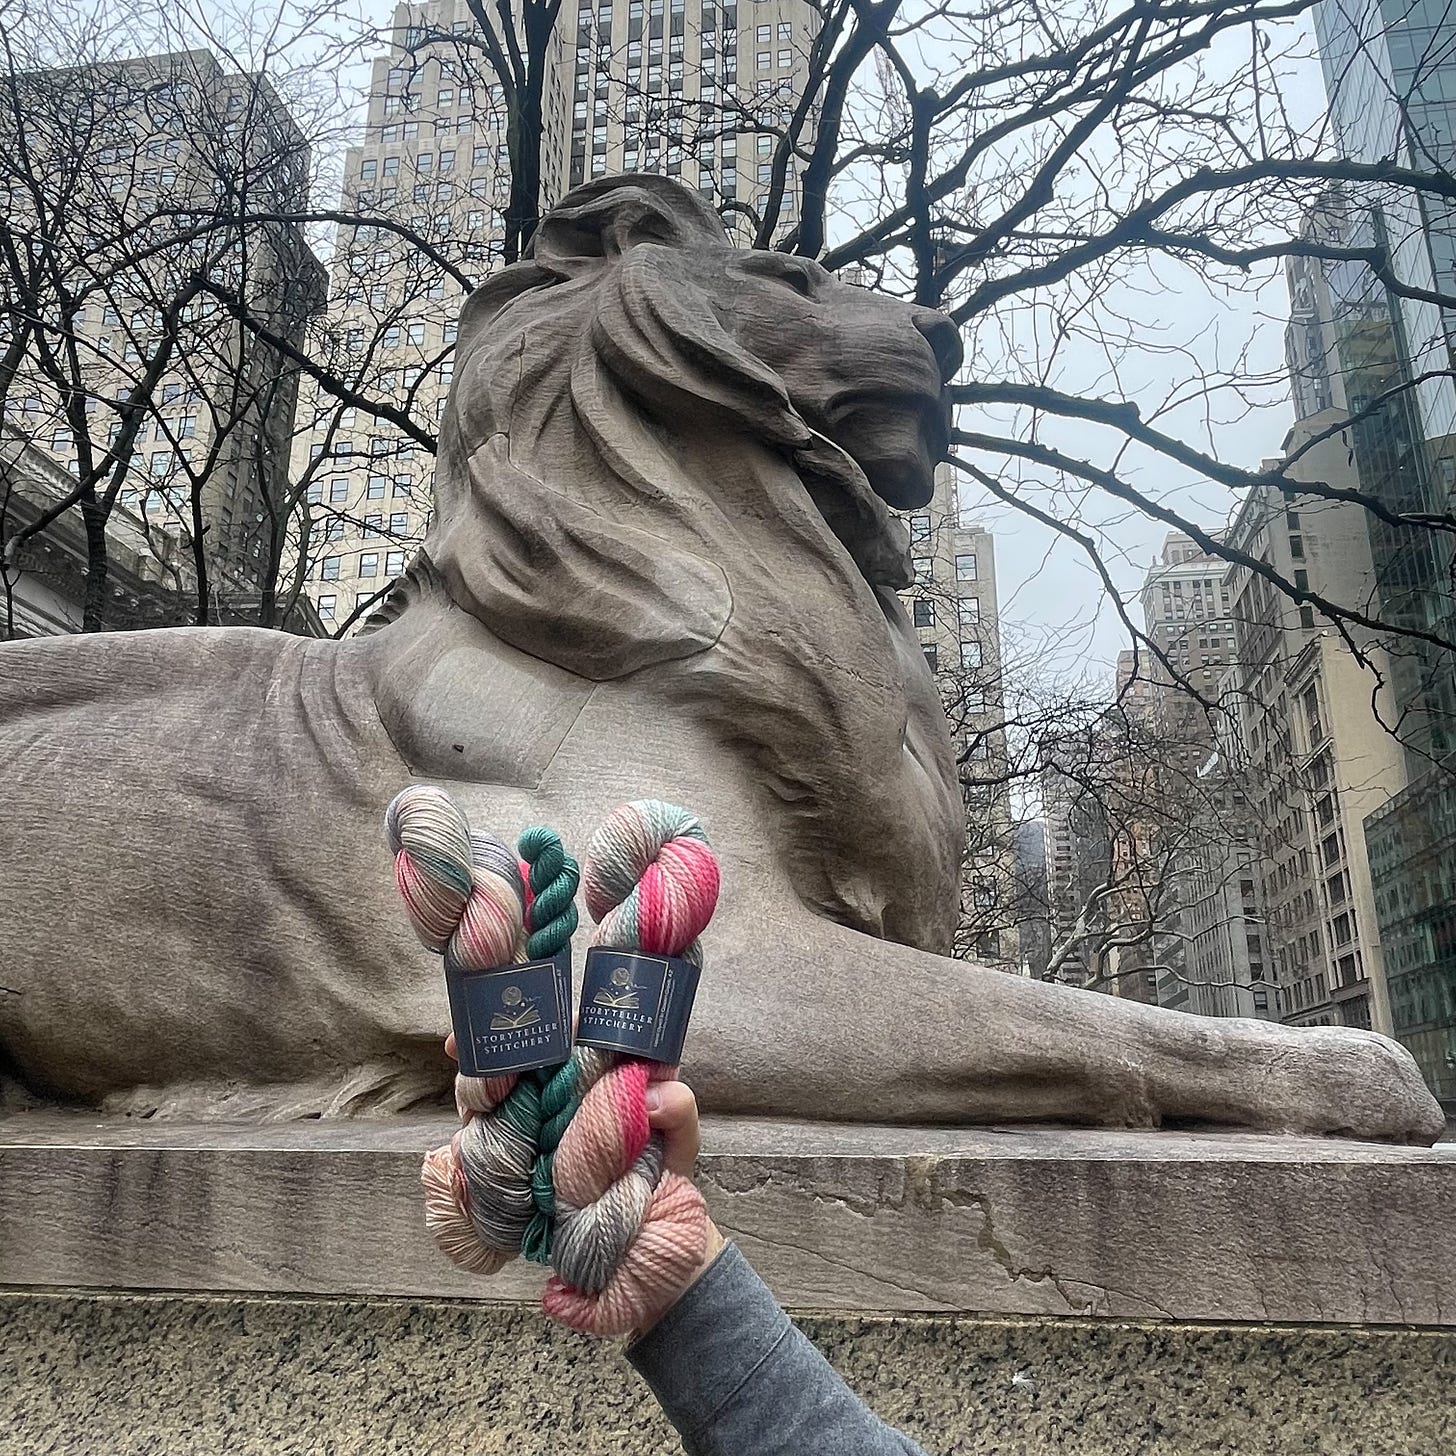 Image of a lion statue, with New York buildings in the background and a hand holding up yarn. 